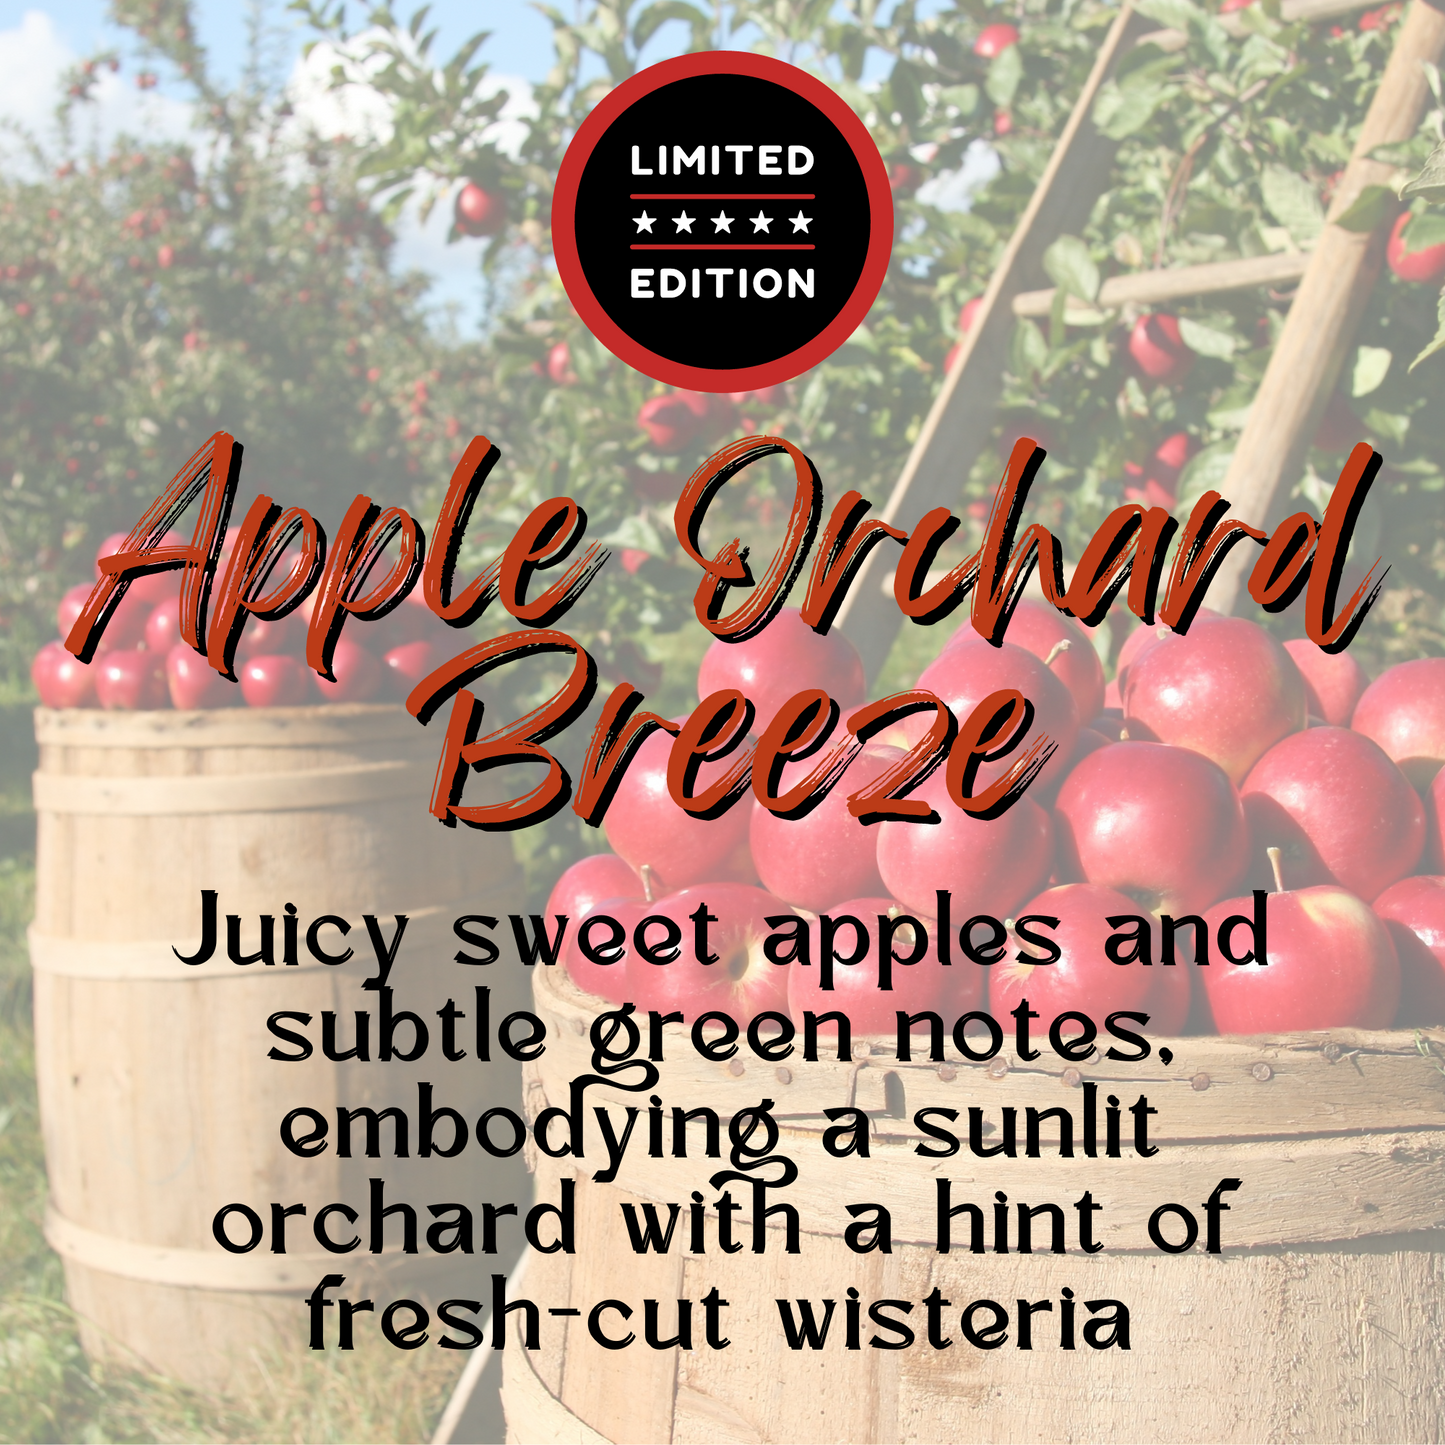 Limited Edition Room + Linen Spray | Apple Orchard Breeze | Odor Eliminating Air Freshener